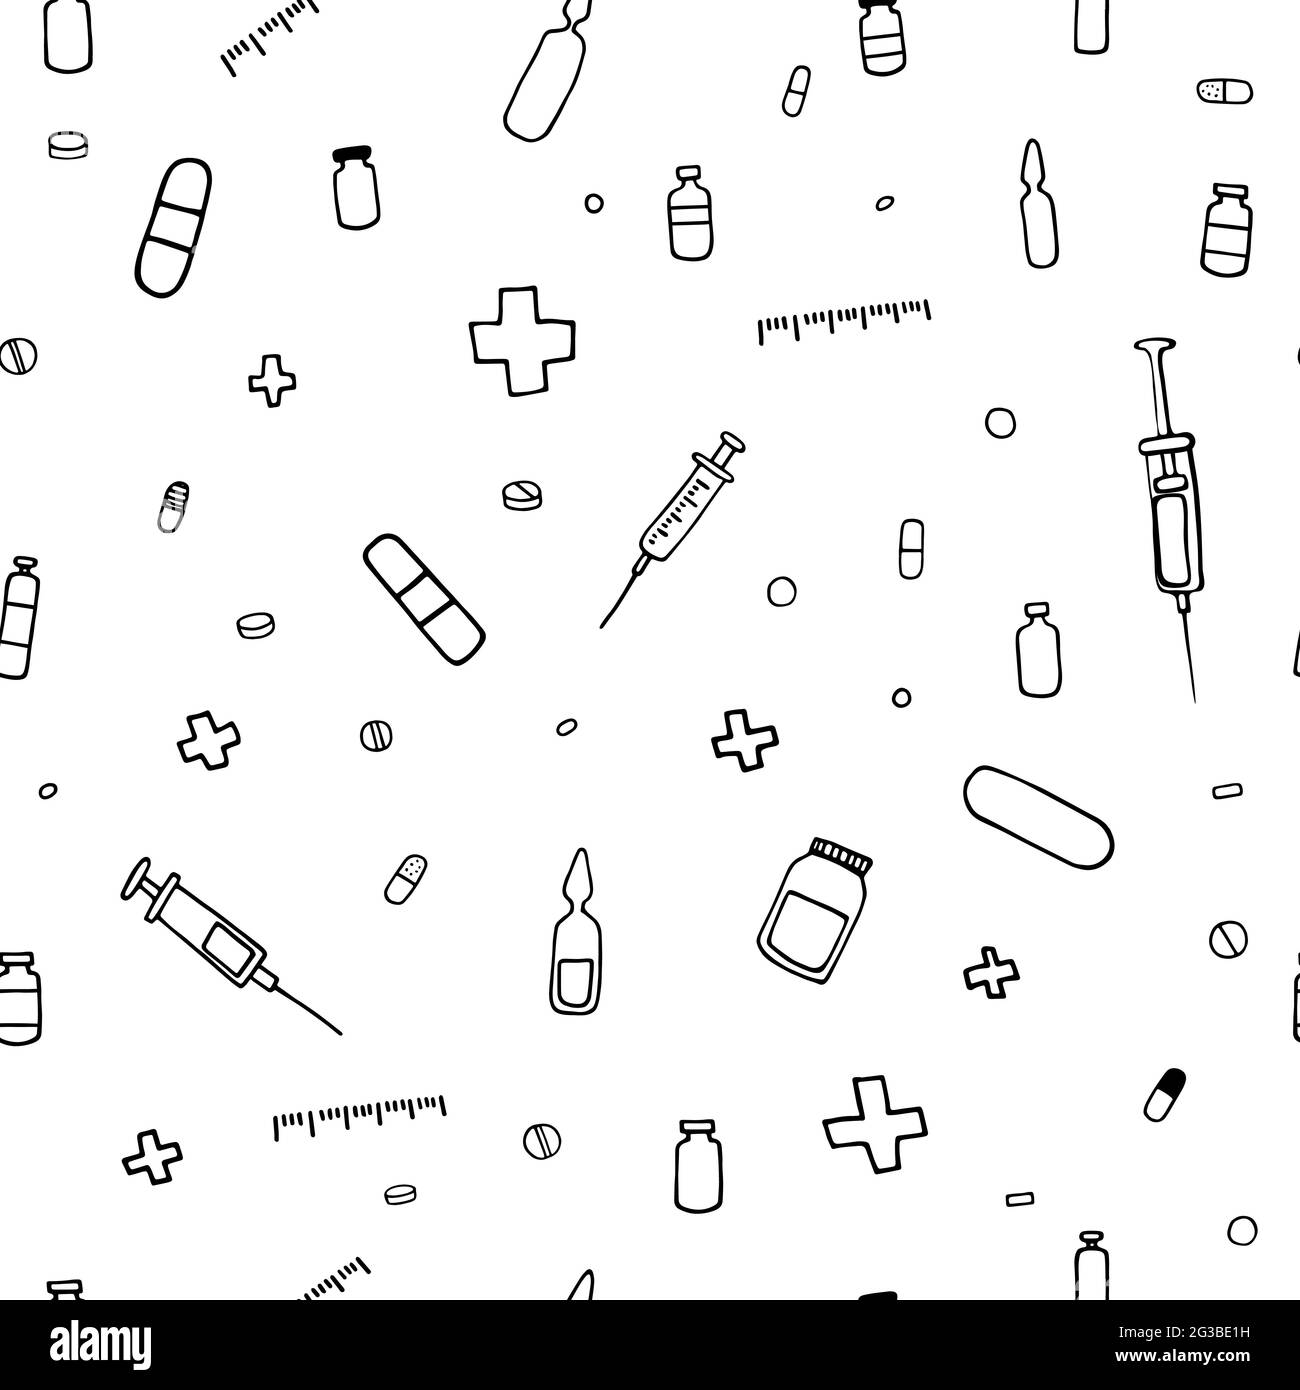 Seamless stock medical pattern. The contours of pharmaceutical things isolated on white background. Syringes, tablets, crosses, plasters, medicines, a Stock Vector